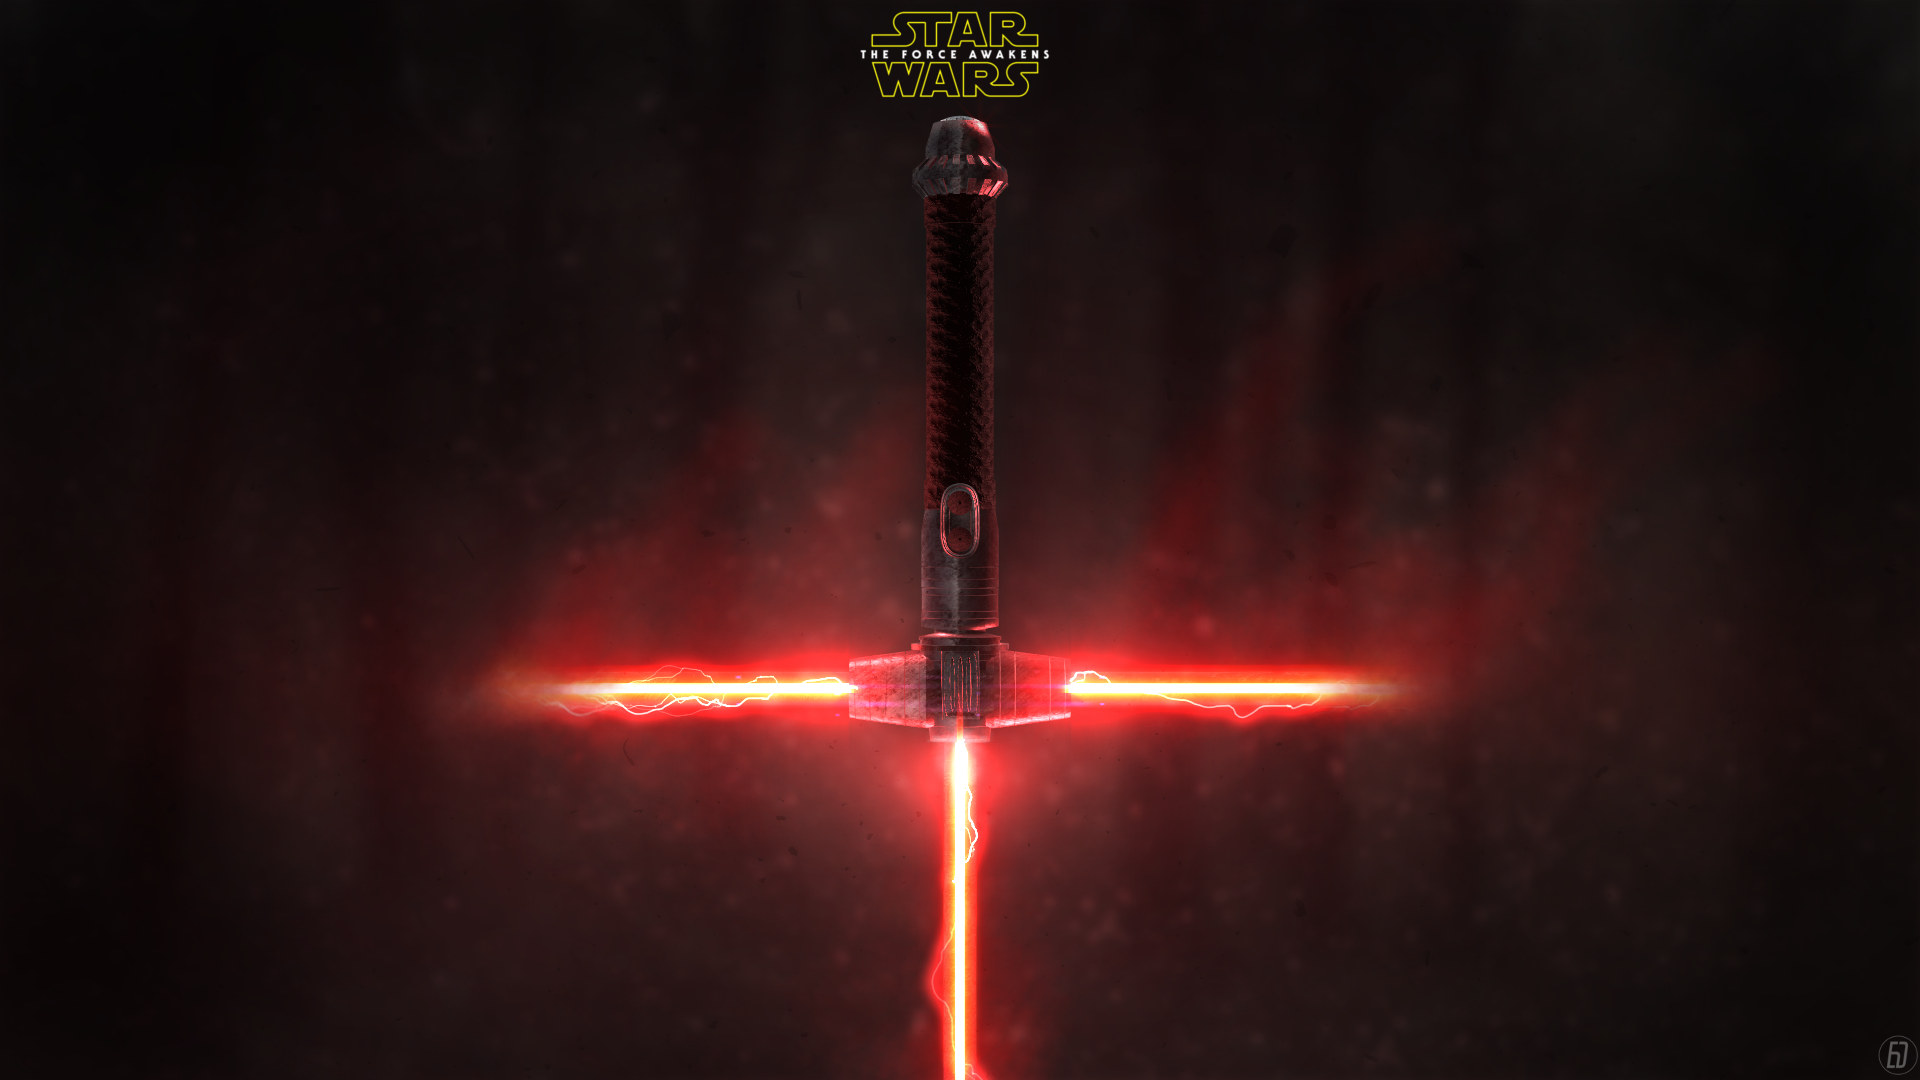  Wars The Force Awakens New Lightsaber by spiritdsgn 1920x1080